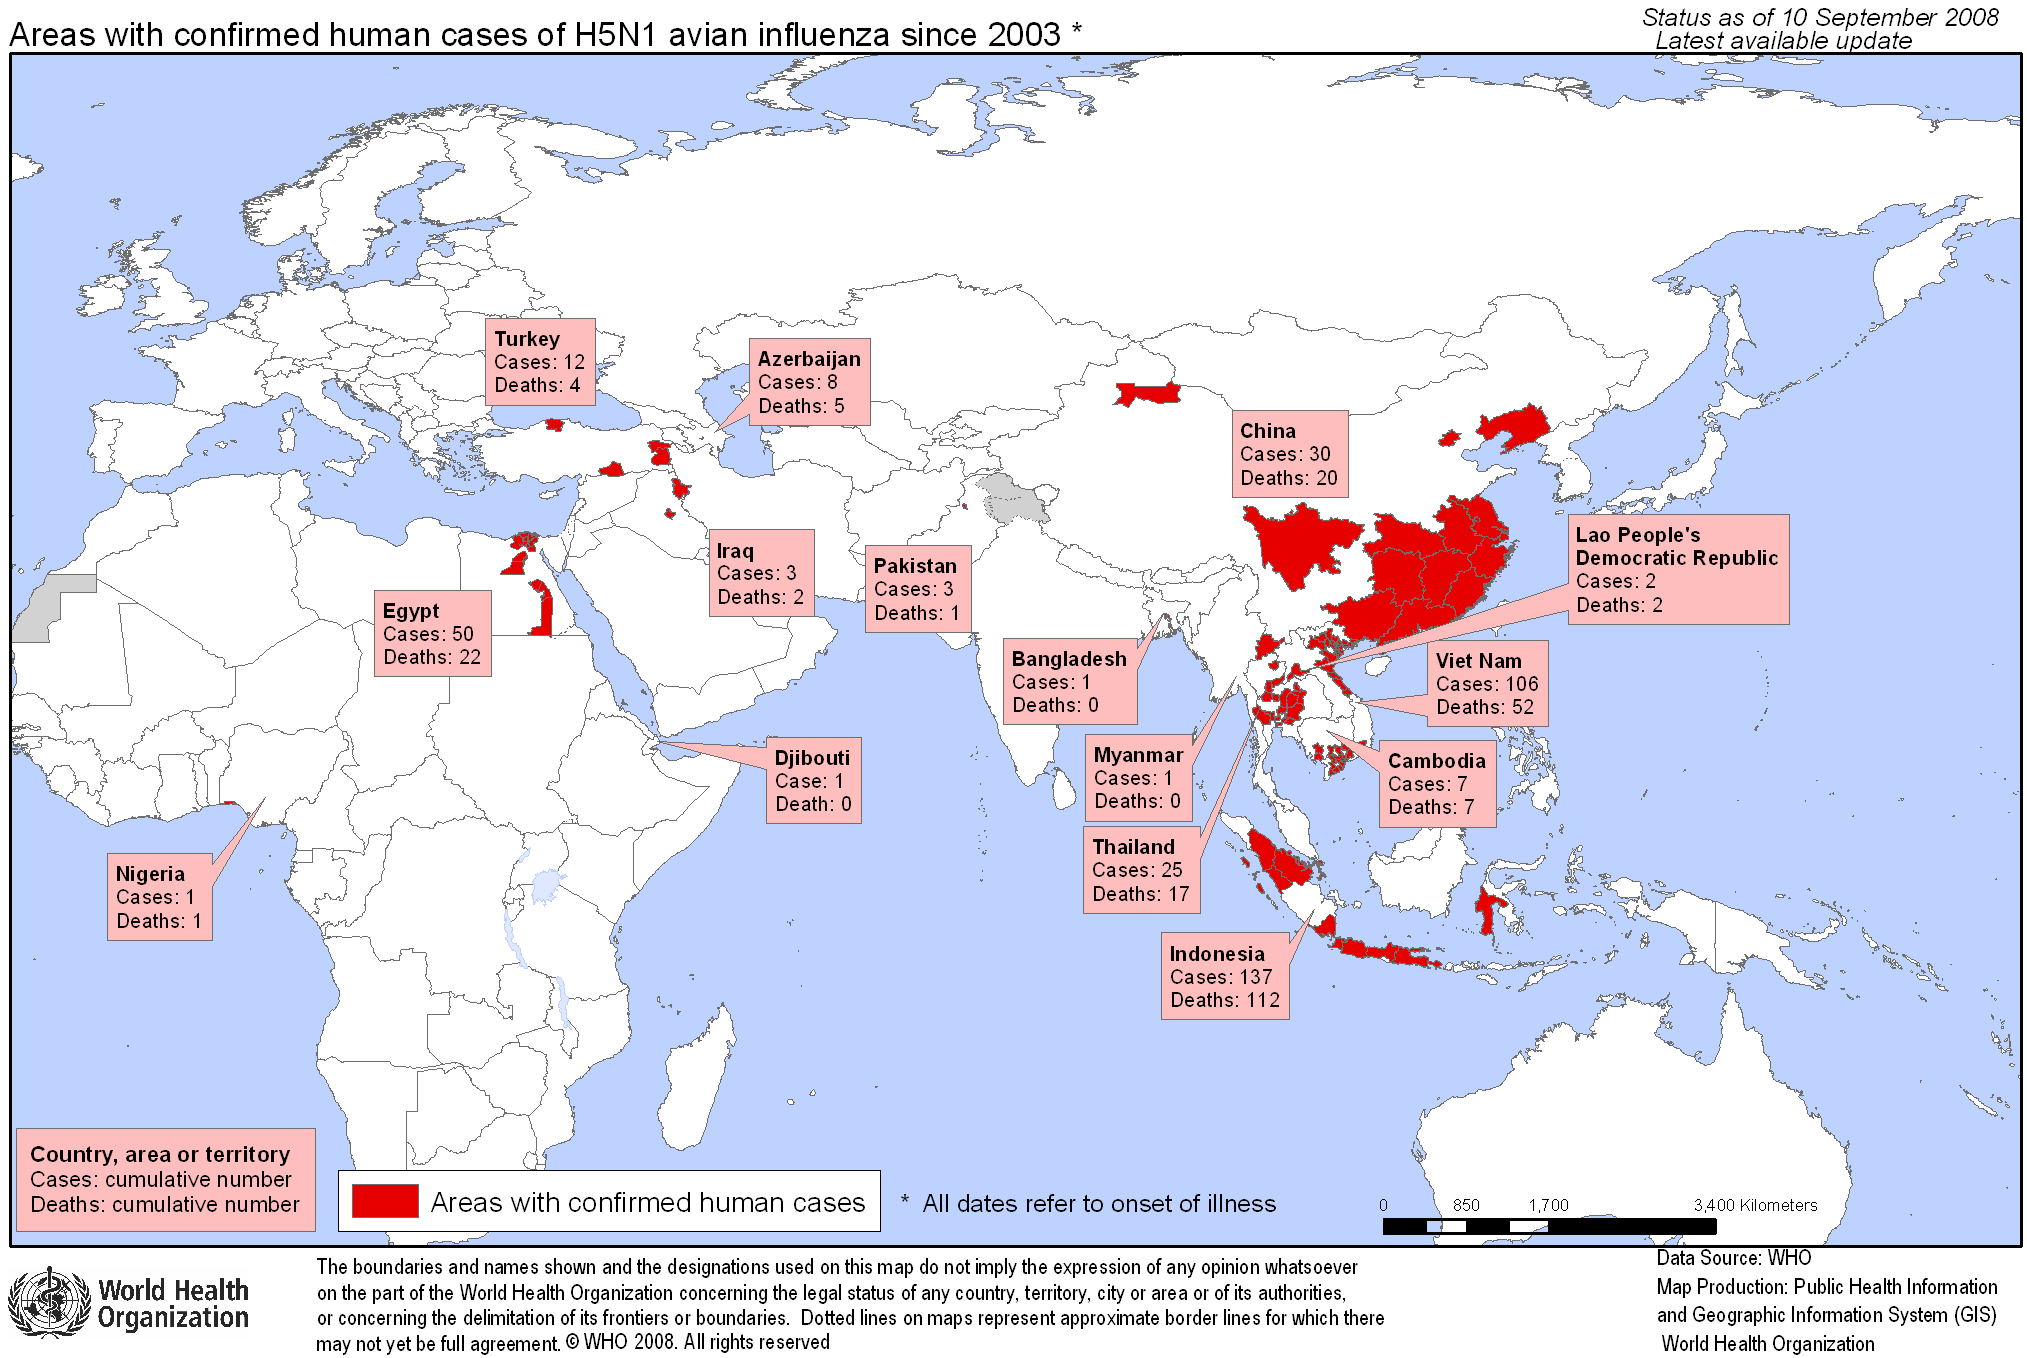 Areas with confirmed human cases of H5N1 avian influenza since 2003